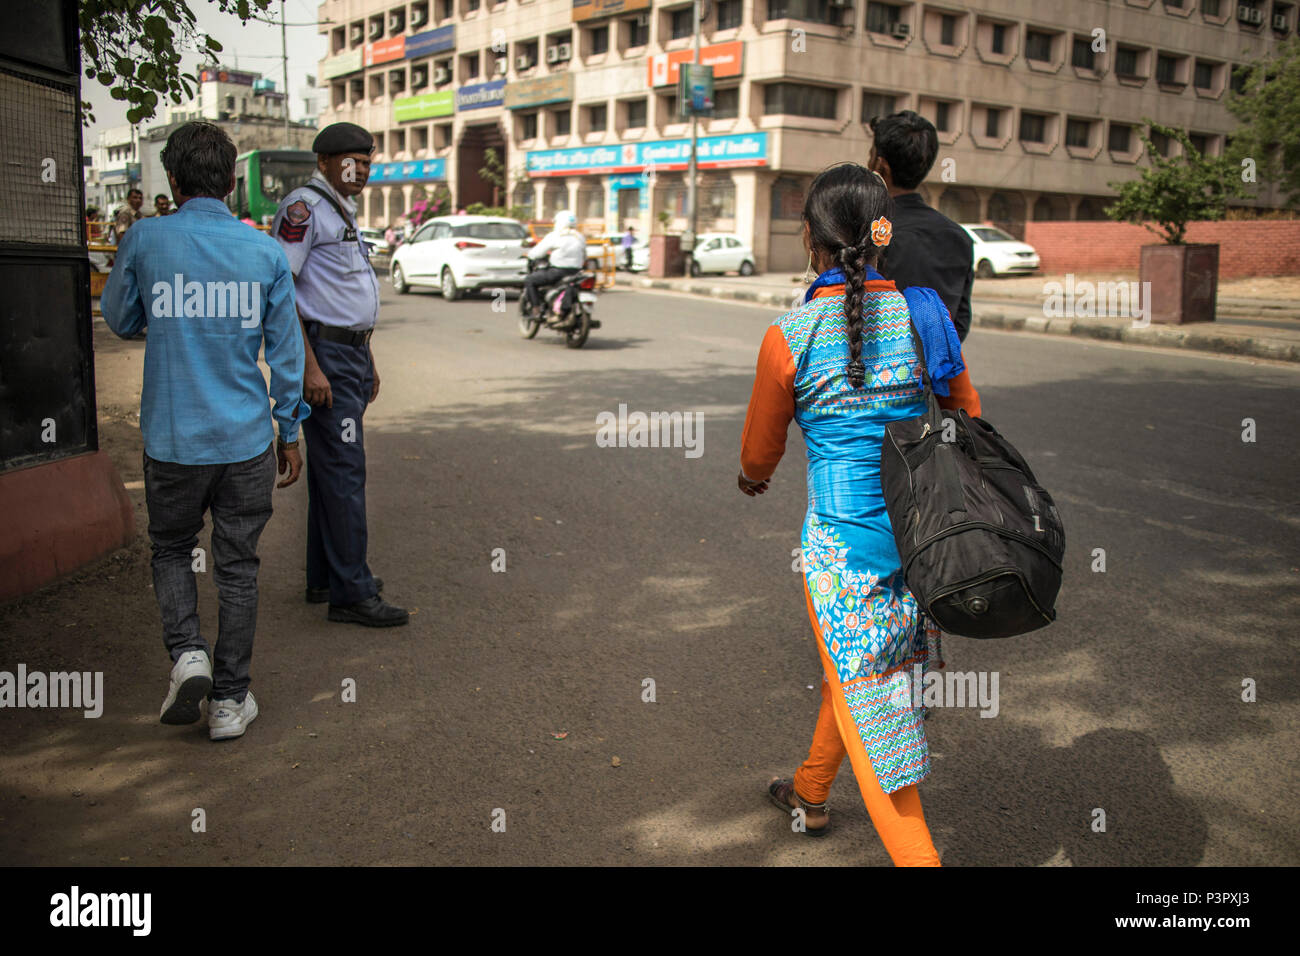 Indian woman in a traditional cloth, police officer, street, India Stock Photo